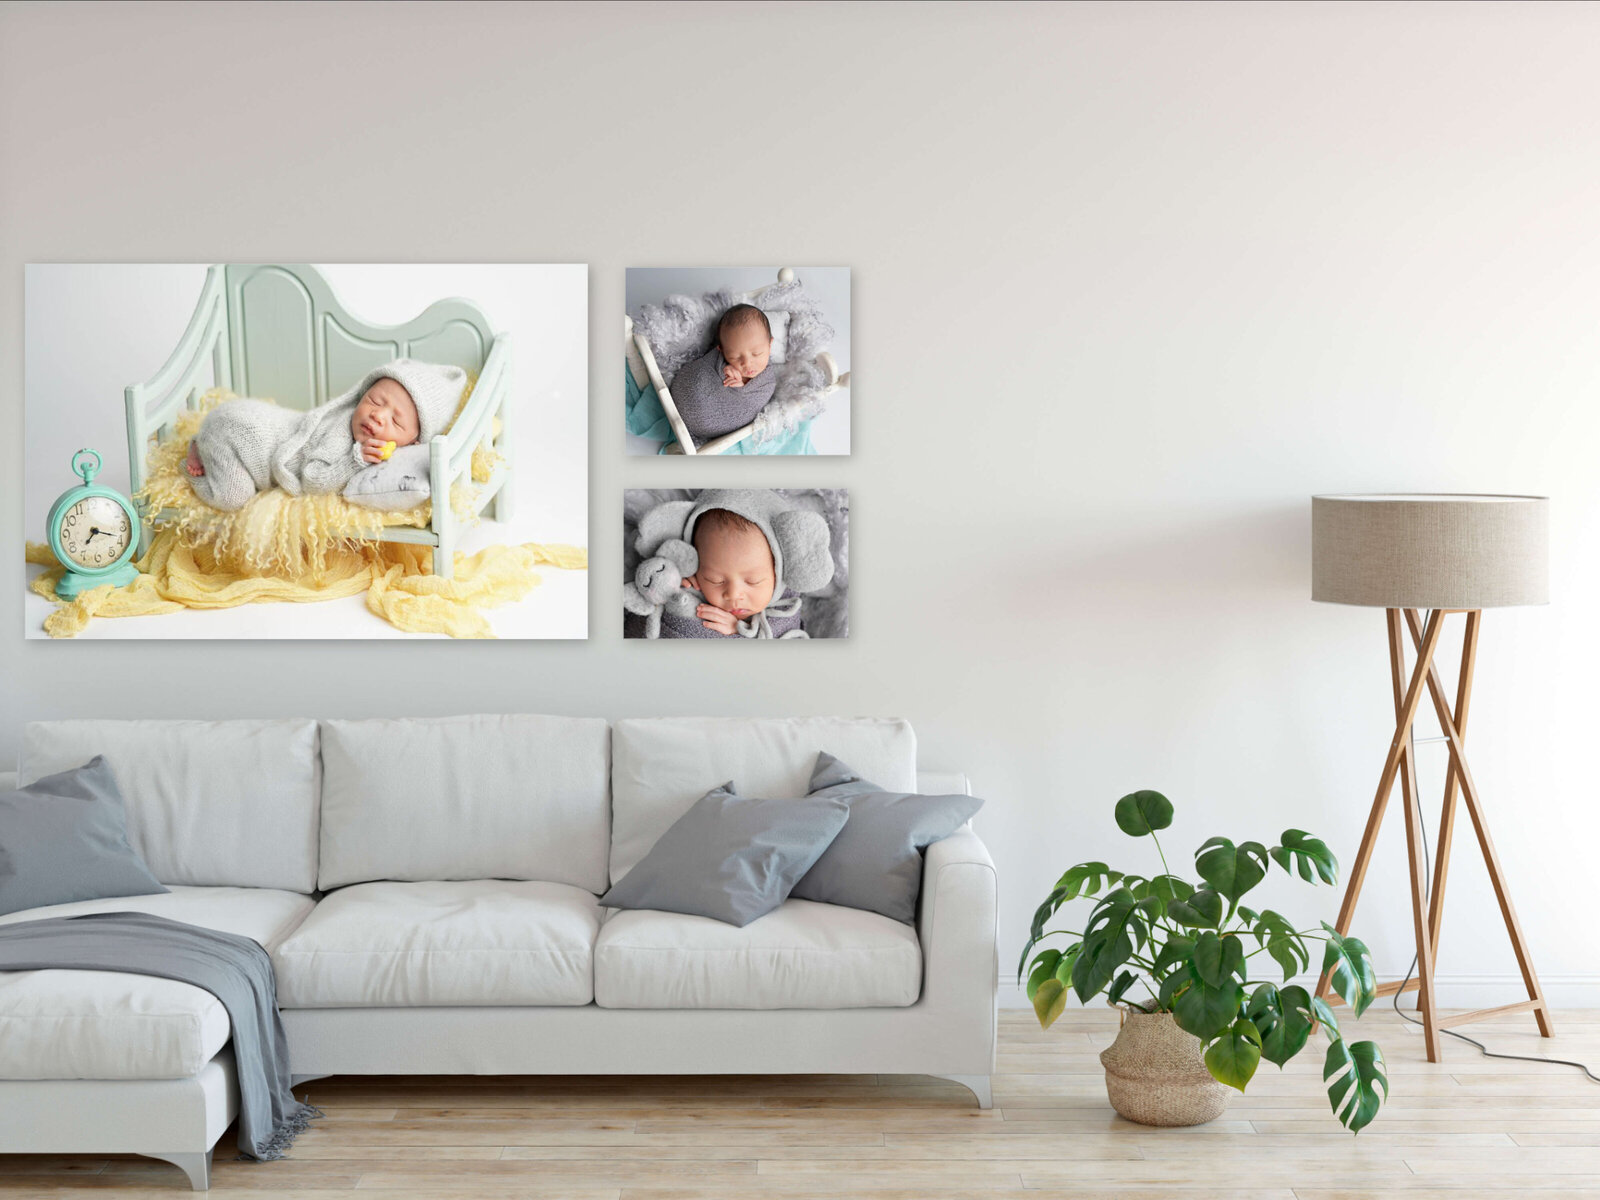 Newborn portraits hang on the wall of an Orlando area's client.